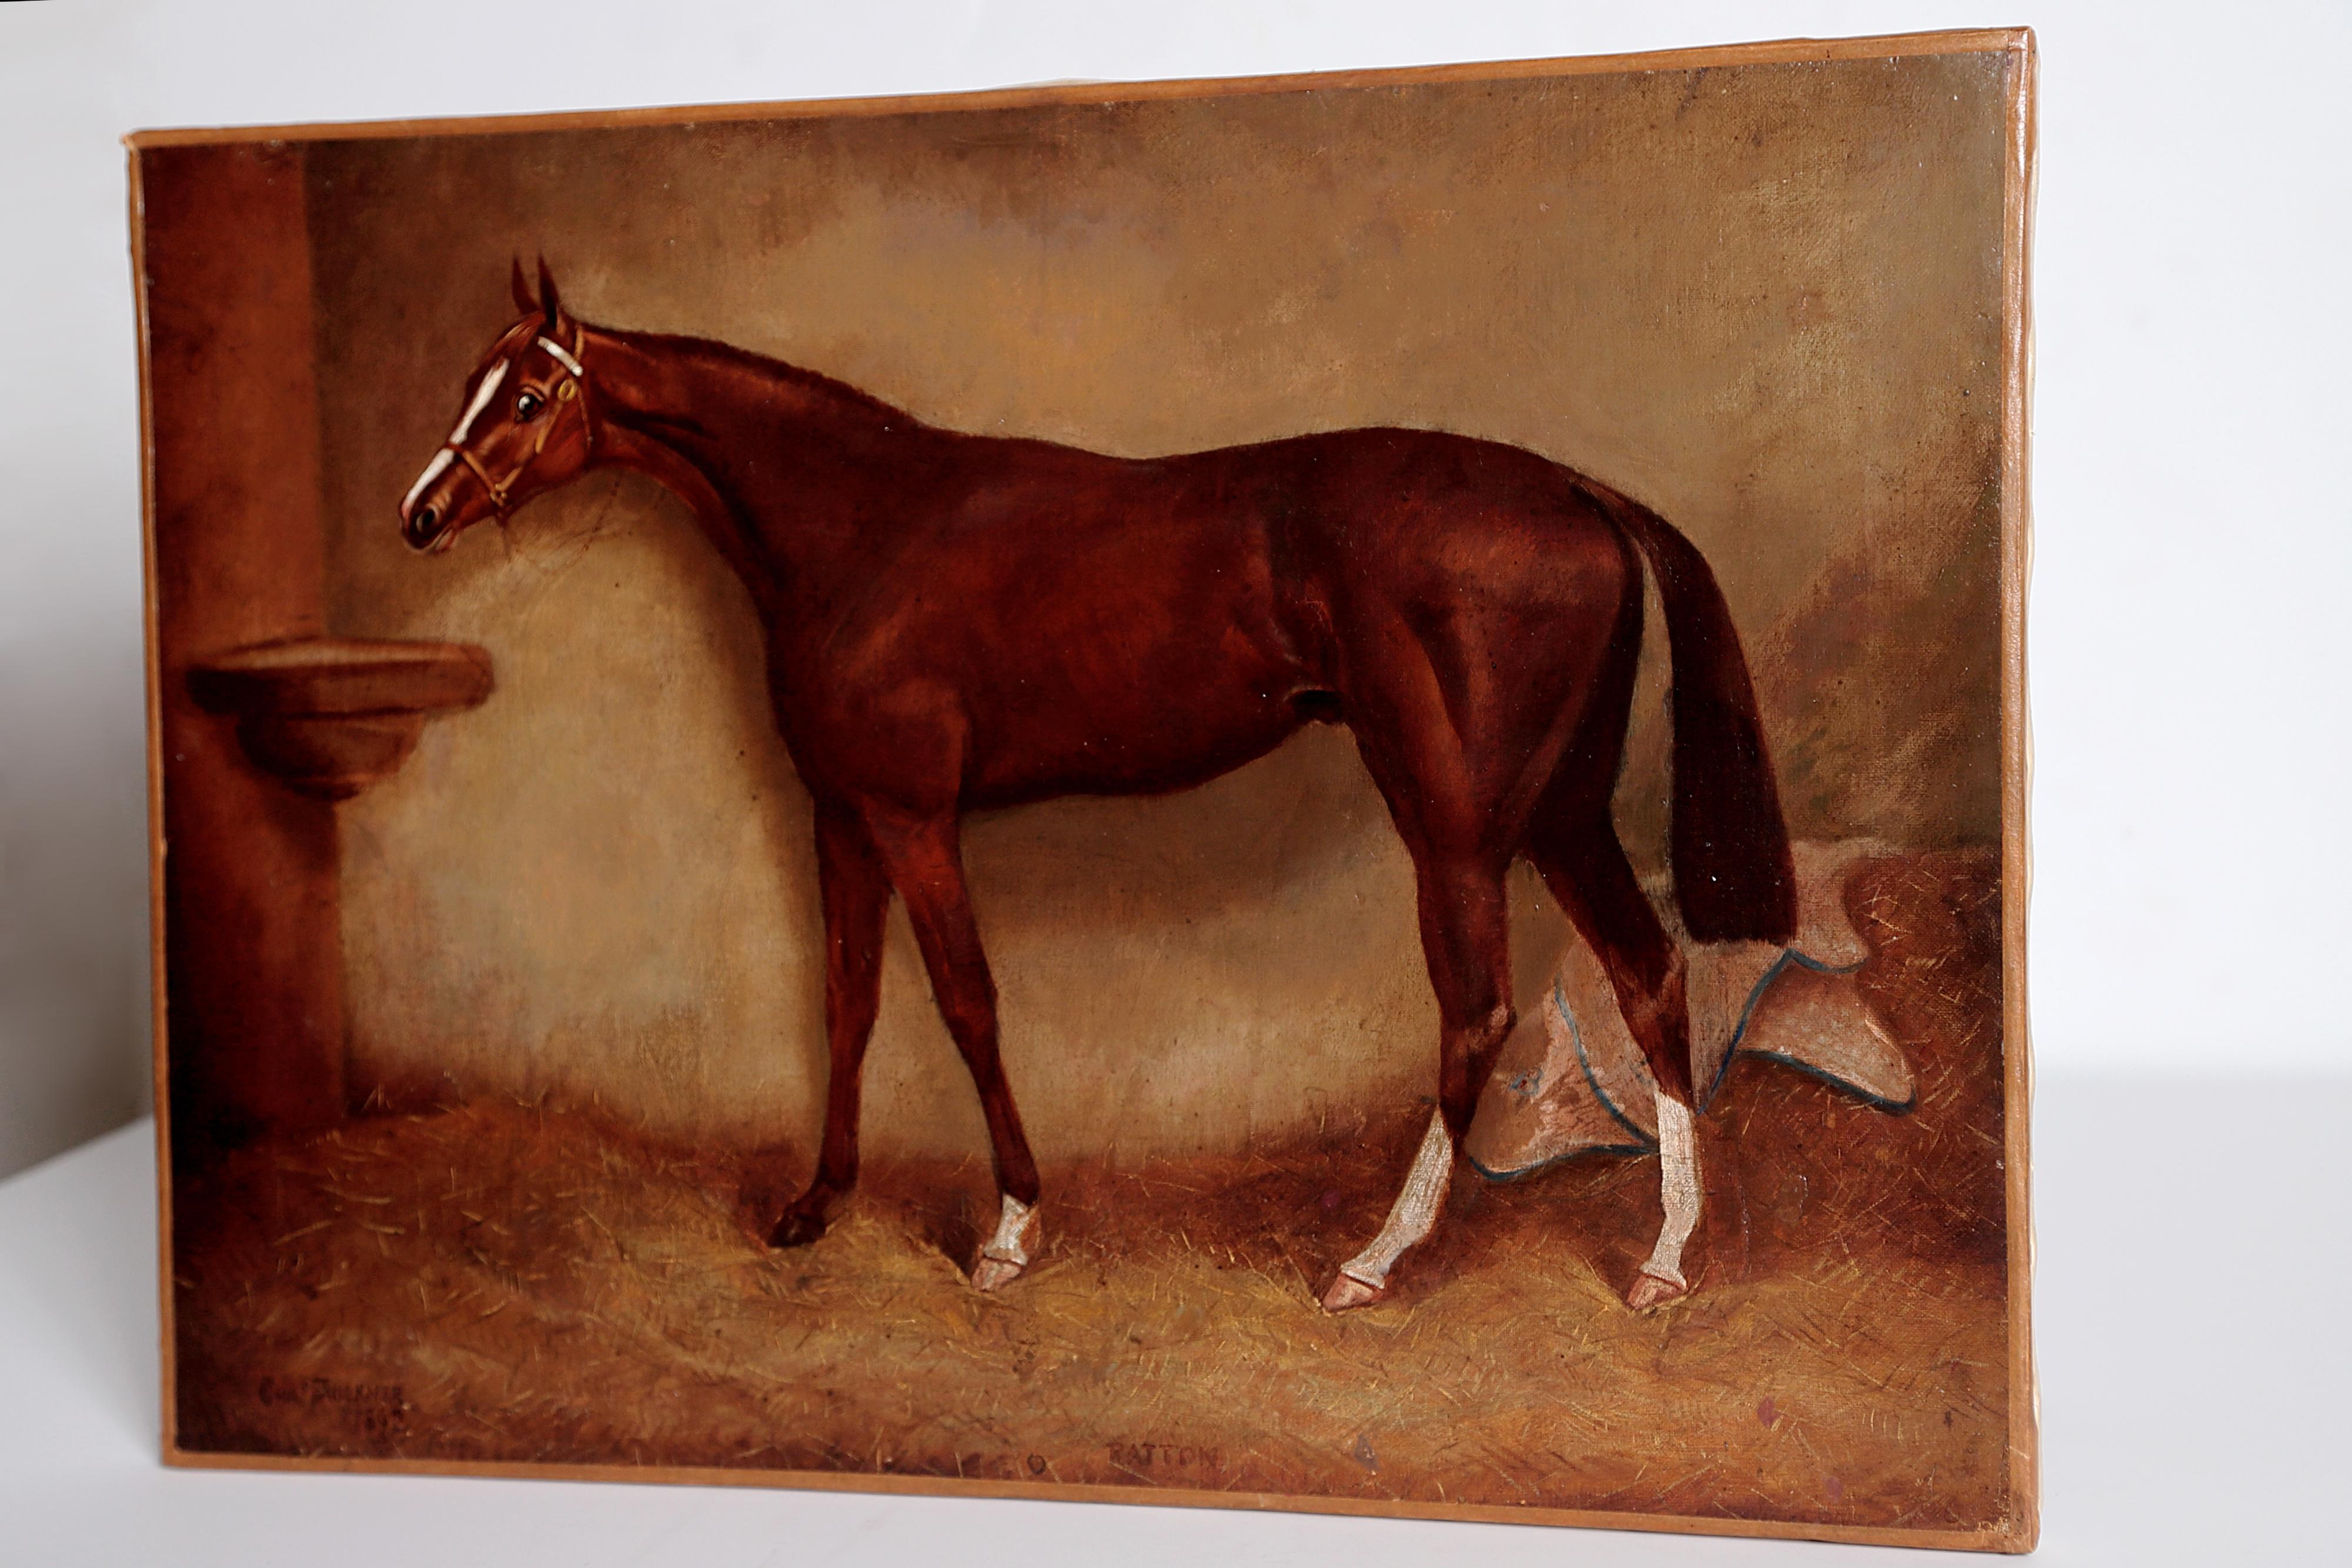 Hand-Painted English Equine Portrait / Ratton by Charles Faulkner '1833-1892' Unframed